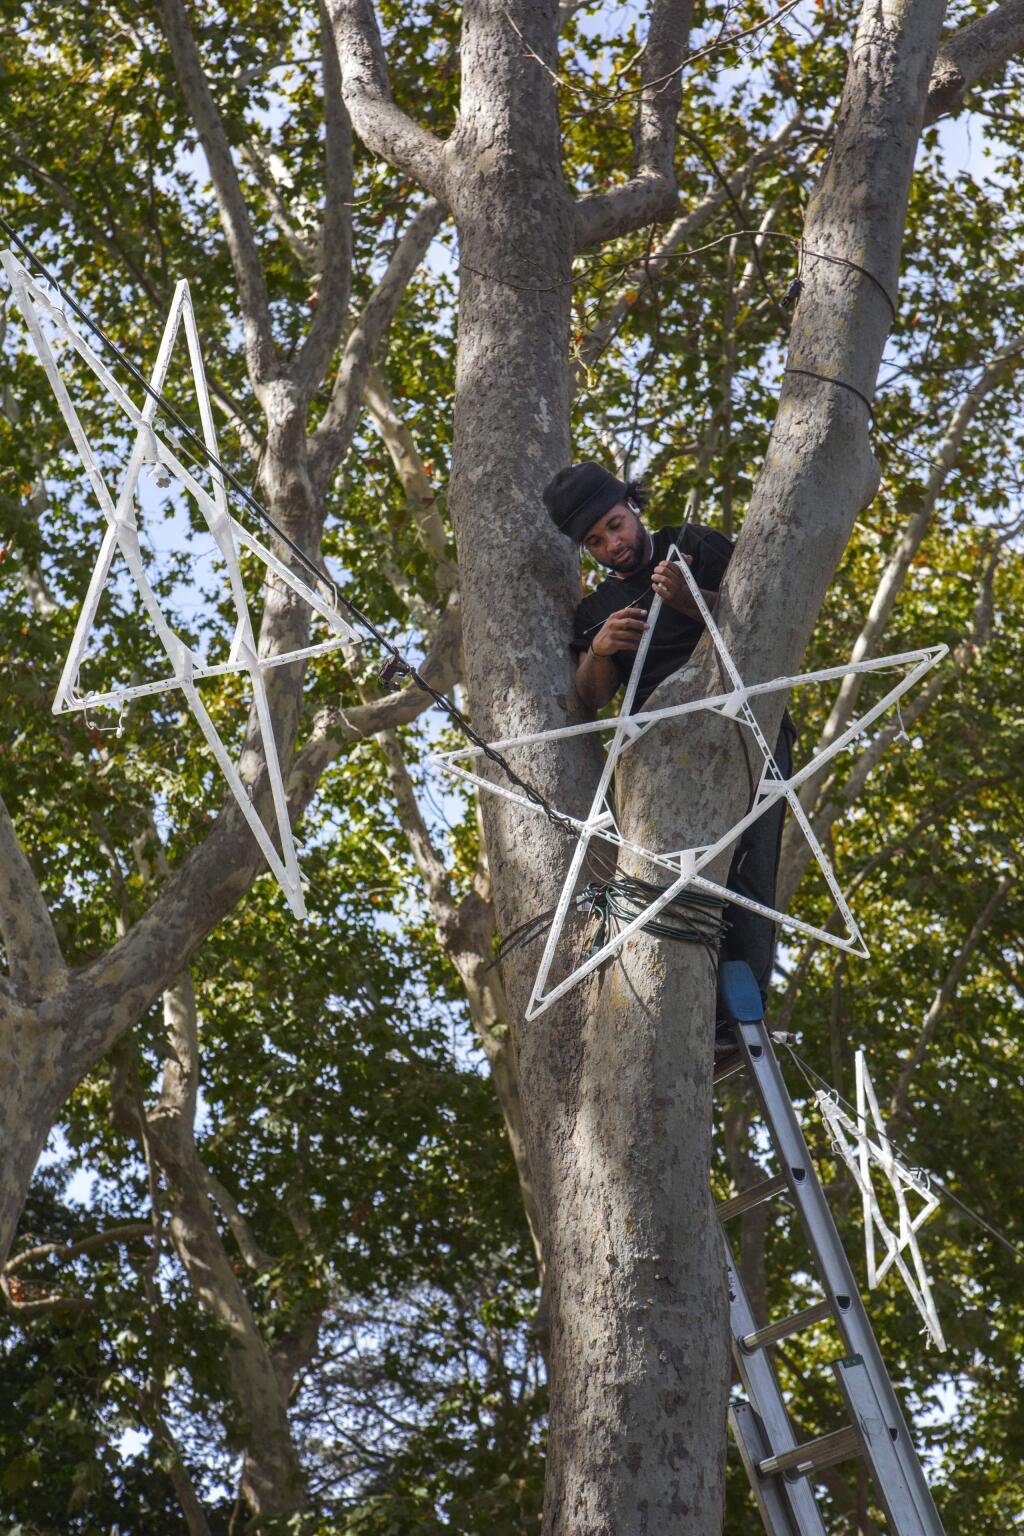 Niqeel Wyndham, of Christmas Lights Pros, hung stars on the Plaza on Thursday, Oct. 24, in preparation for the Plaza Christmas lighting celebration. (Photo by Robbi Pengelly/Index-Tribune)